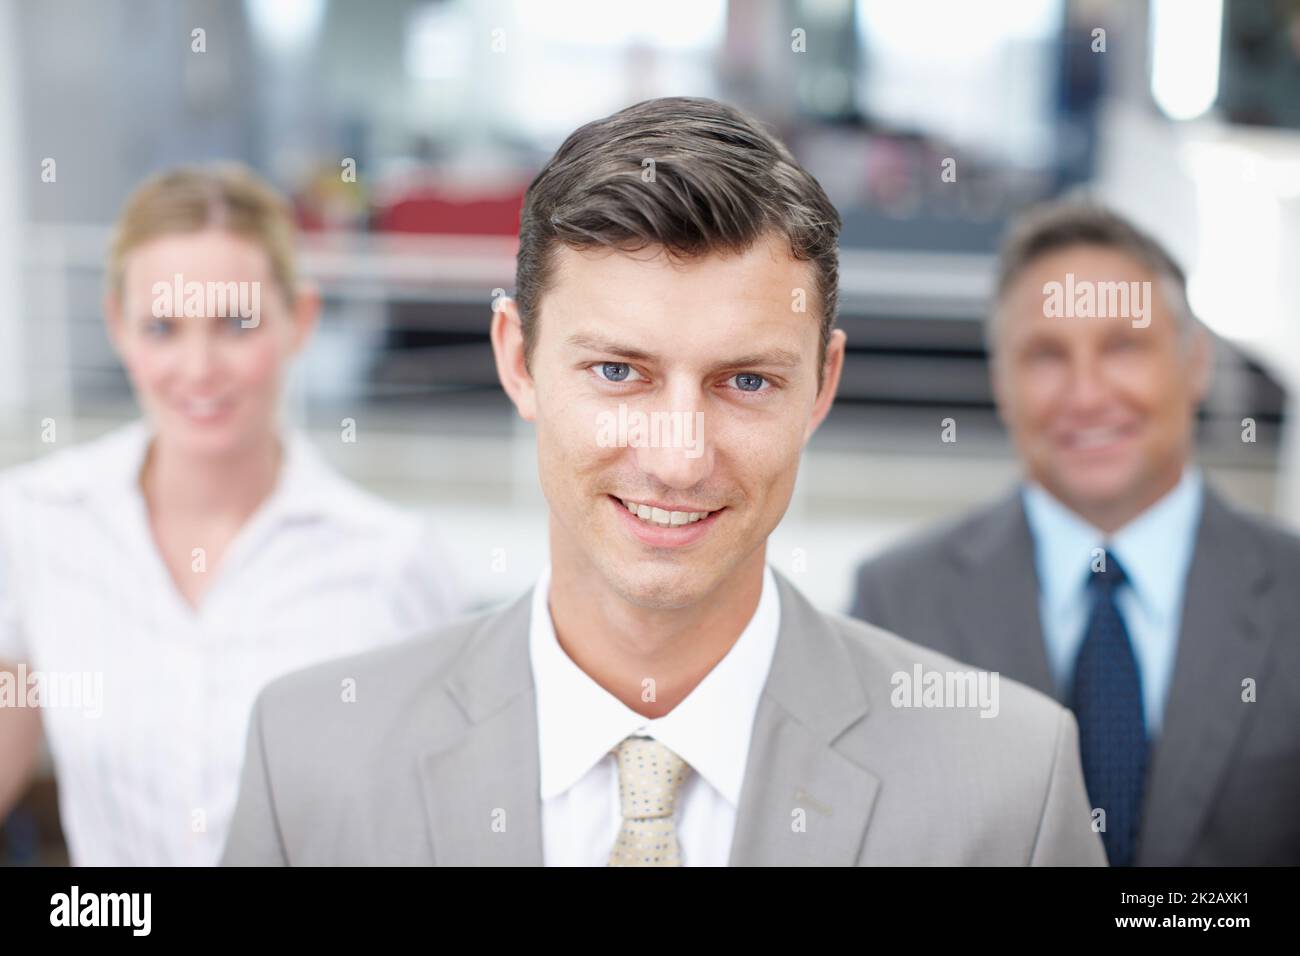 His ideas always have their support. Portrait of an ambitious executive with colleagues standing behind him. Stock Photo